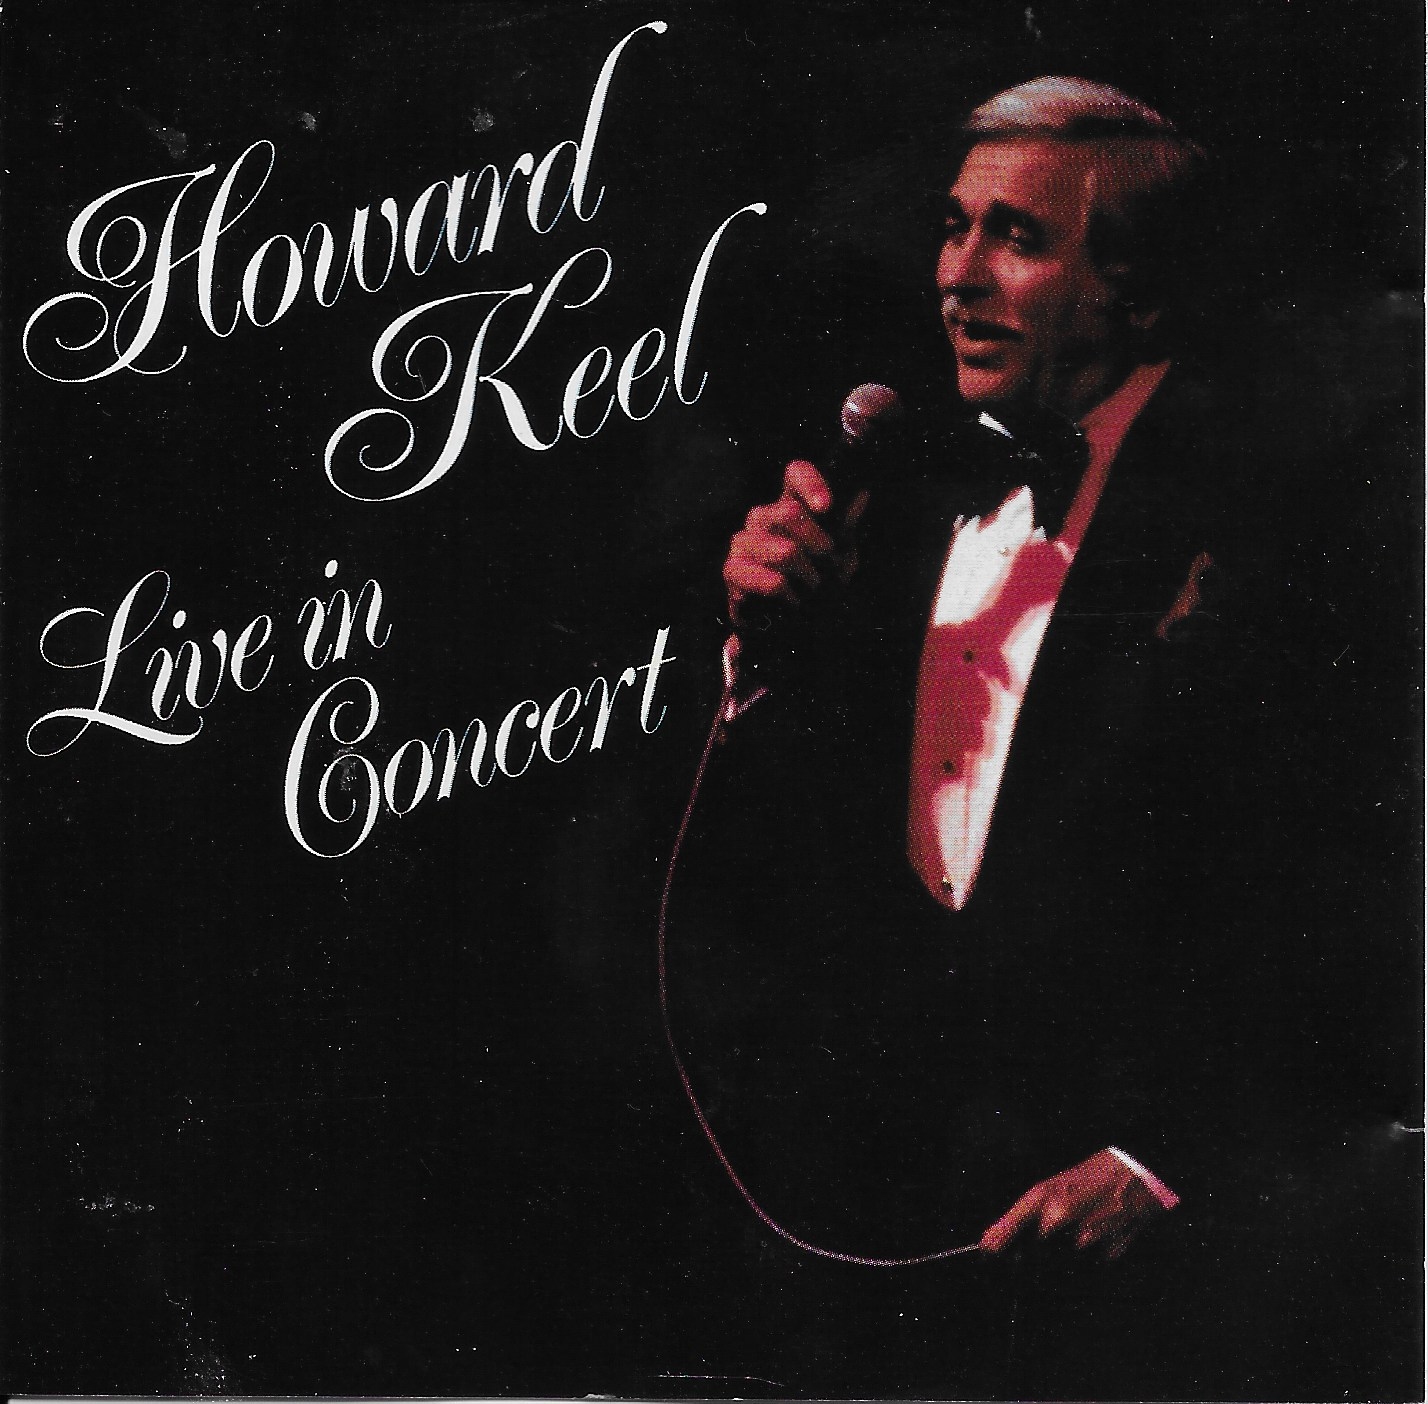 Picture of PWKS 860 Howard Keel live in concert by artist Howard Keel from the BBC cds - Records and Tapes library